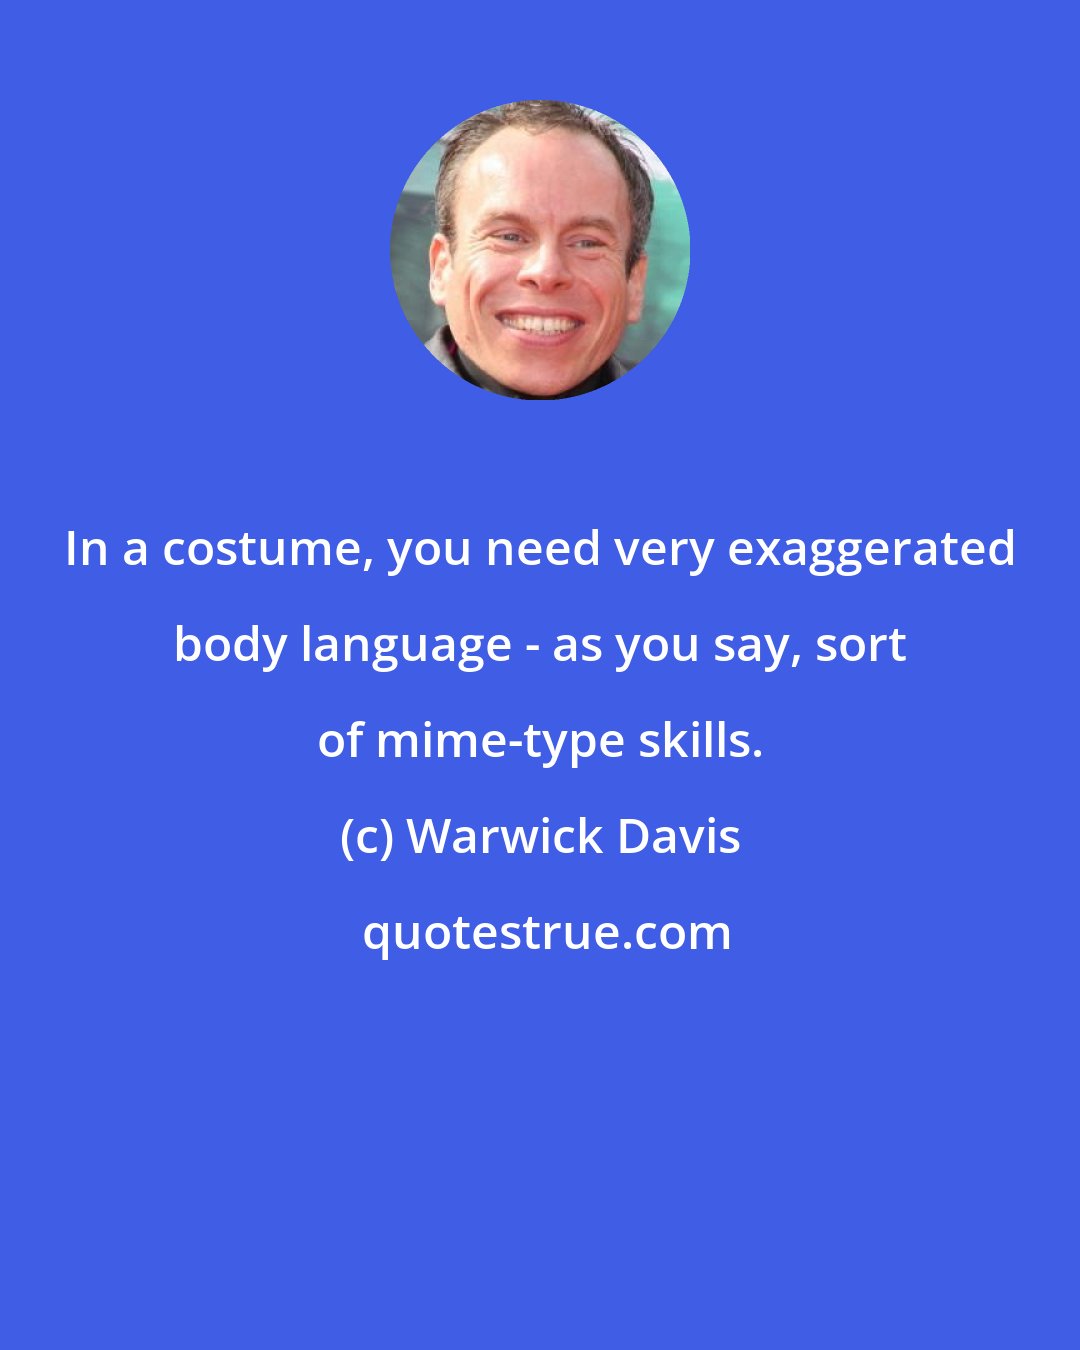 Warwick Davis: In a costume, you need very exaggerated body language - as you say, sort of mime-type skills.